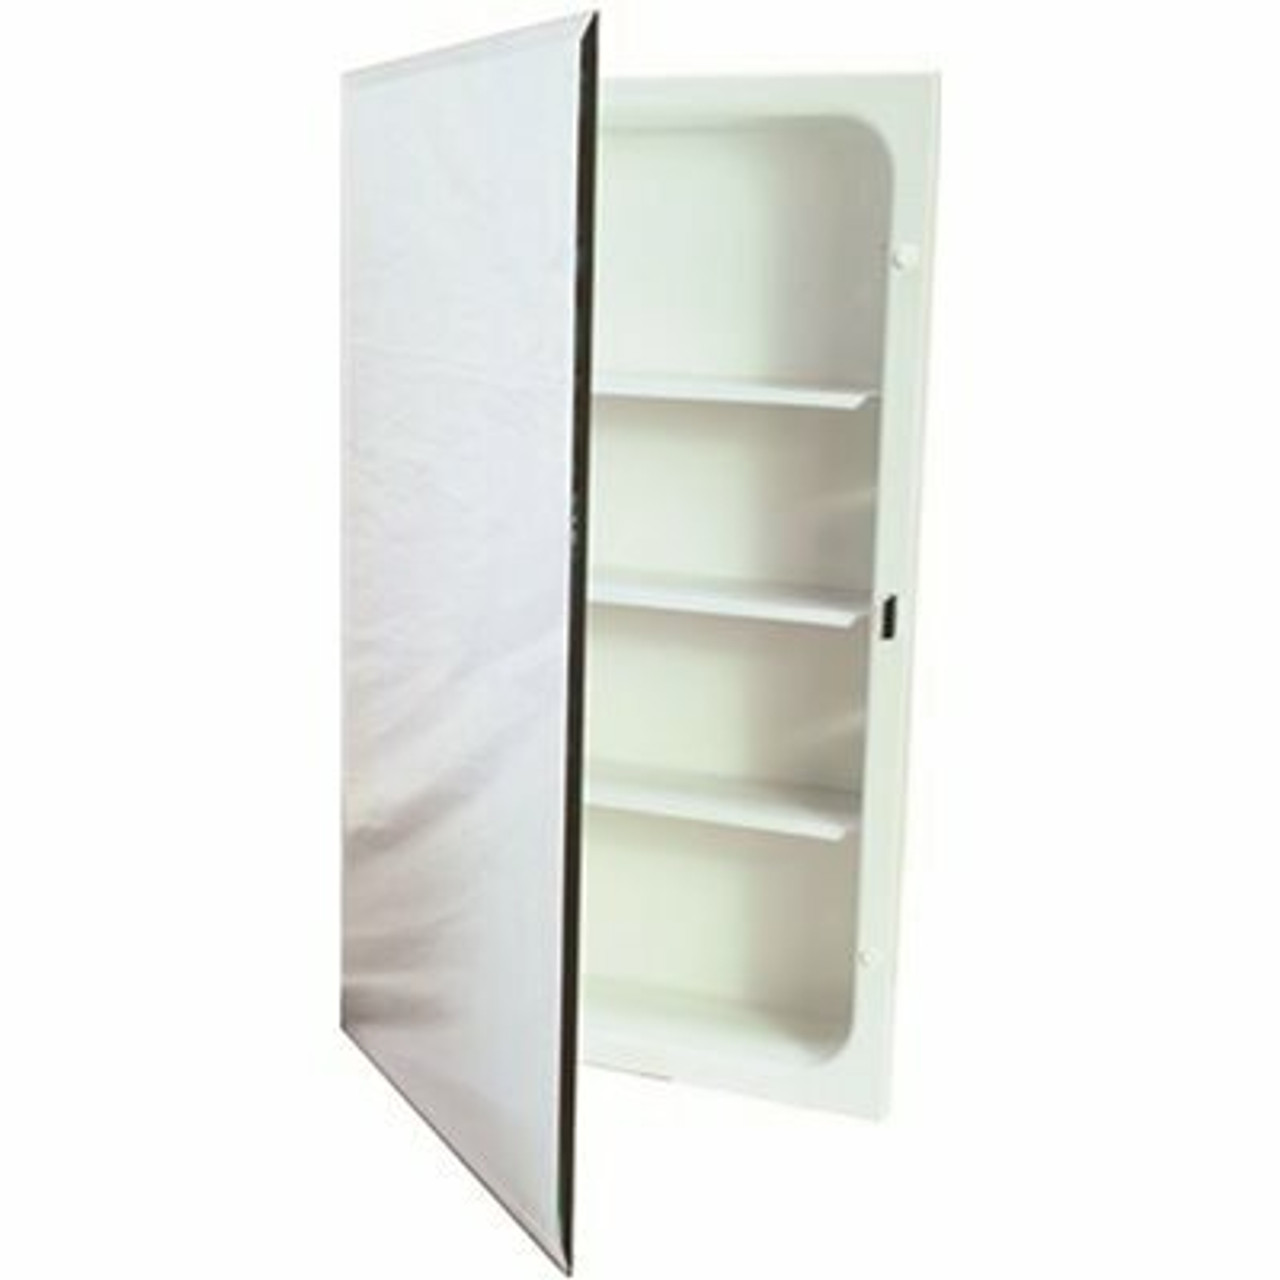 Proplus 16 In. X 20 In. Recessed Medicine Cabinet In White